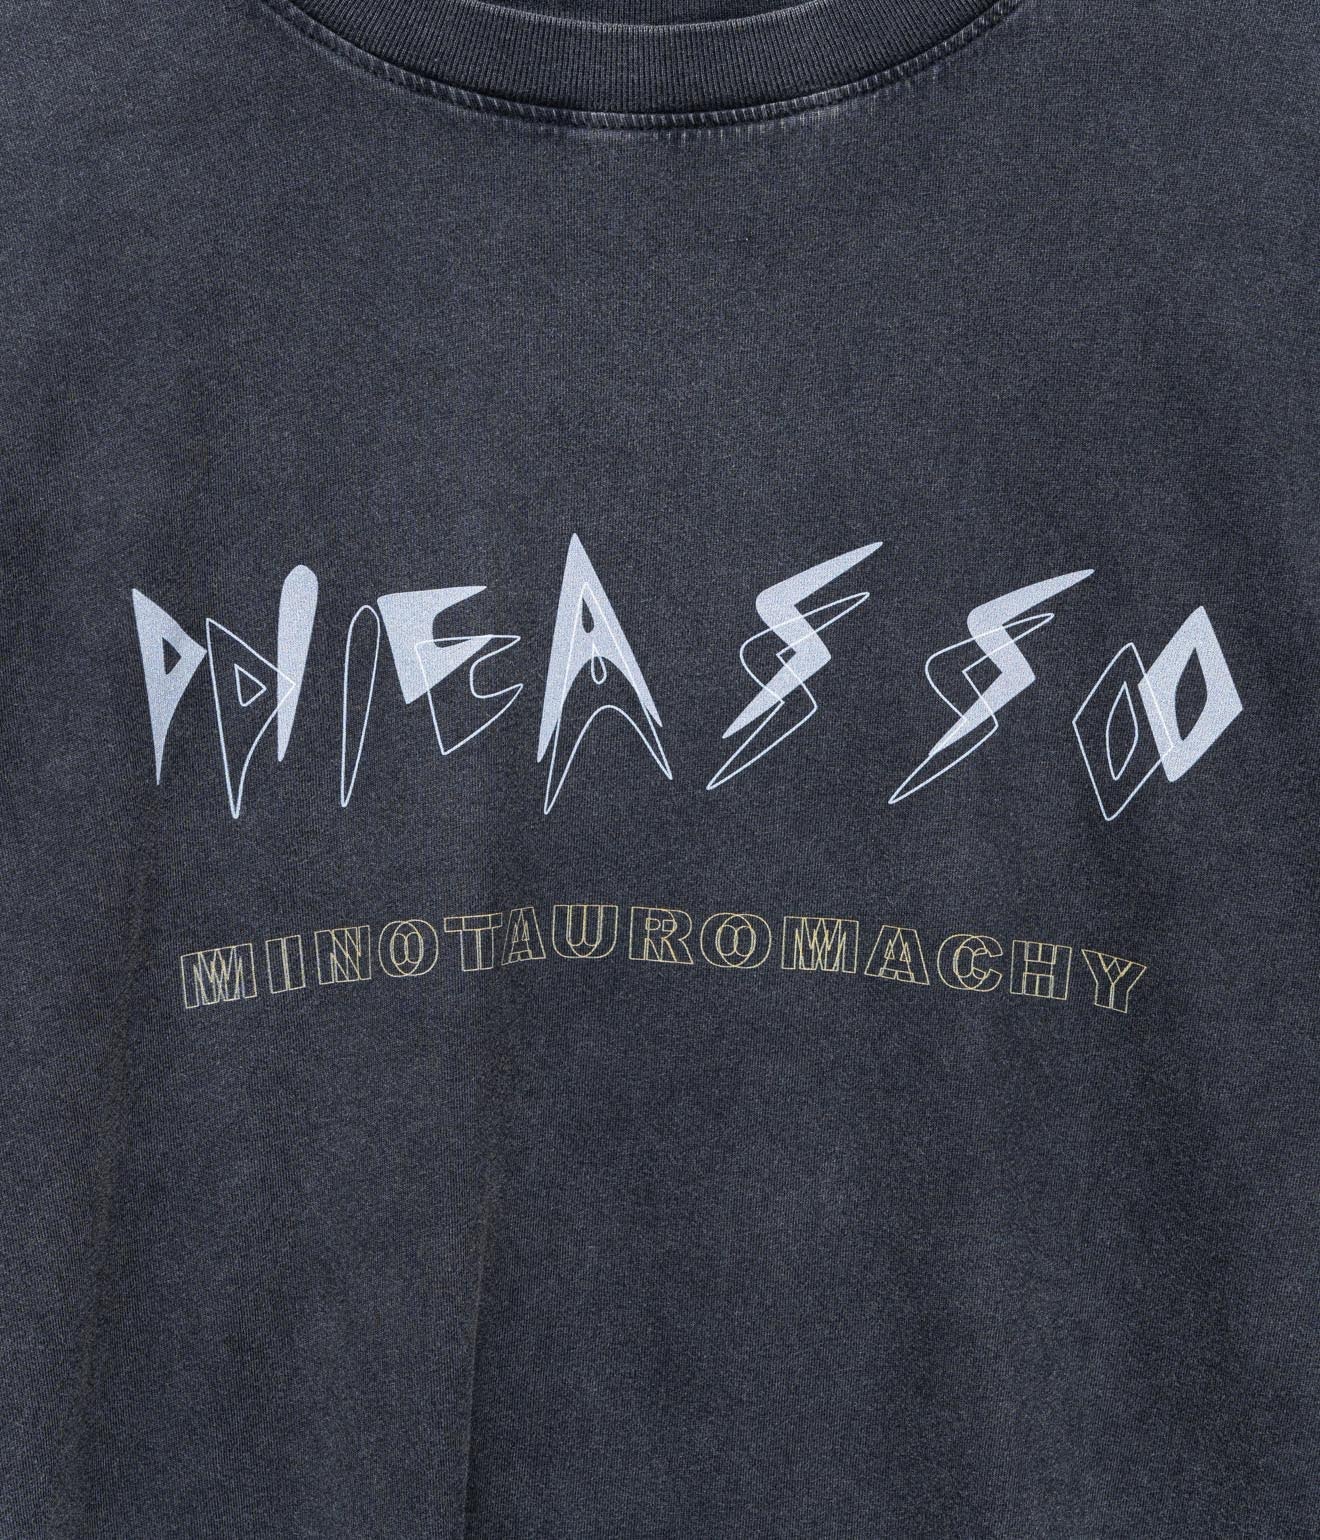 DEATHMASK Merchandise "PICASSO MINOTAUROMACHY" SINGLE-SIDED PRINT L/S - WEAREALLANIMALS